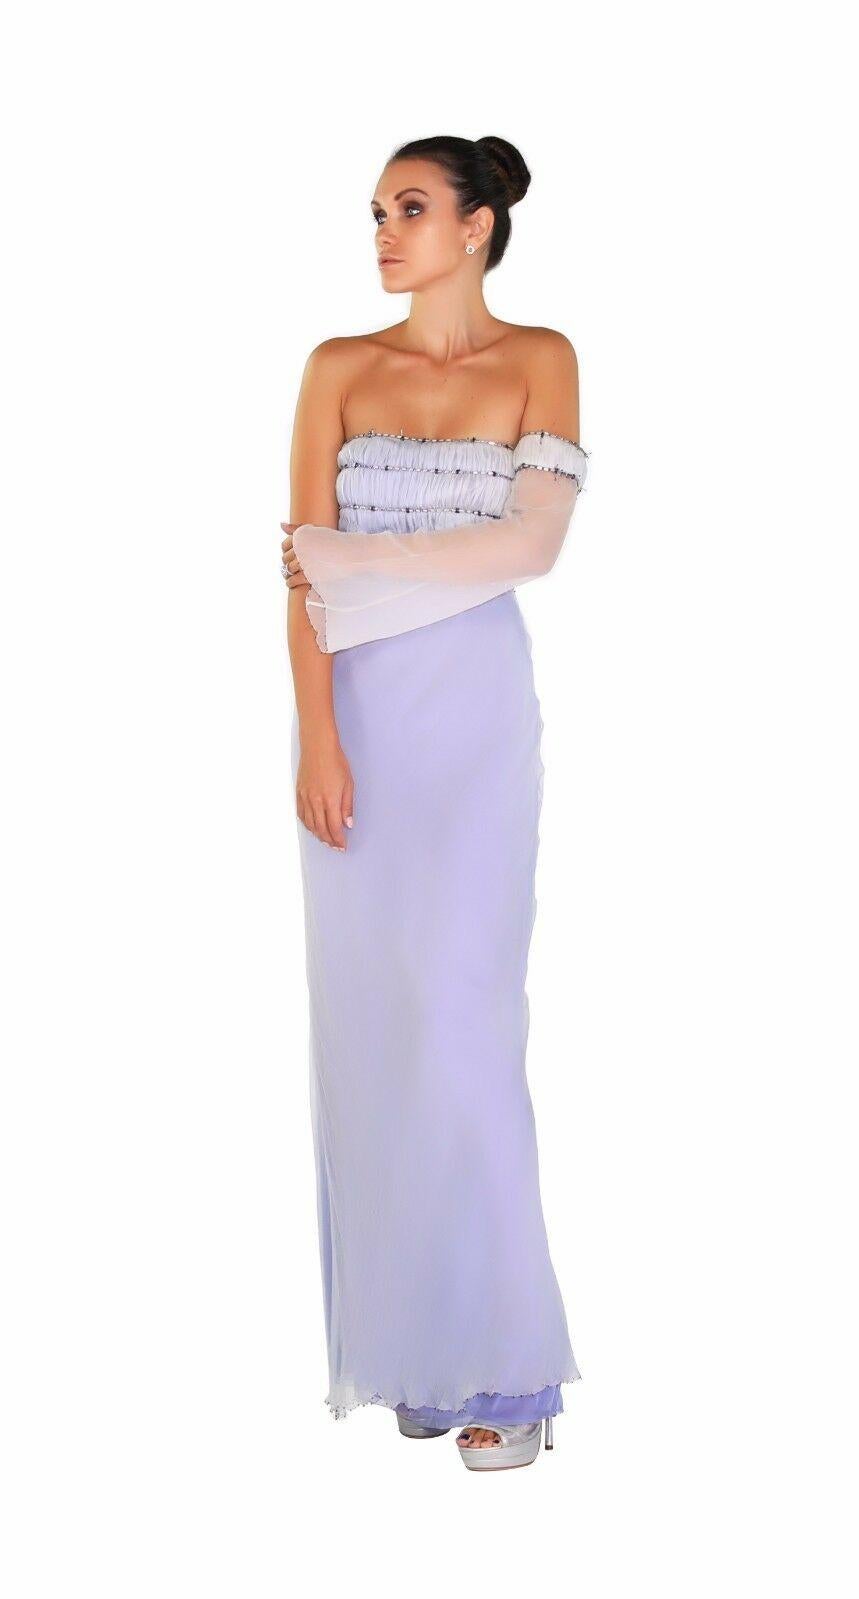 F/W 1998 VINTAGE GIANNI VERSACE COUTURE LILAC Dress 38 - 2 6